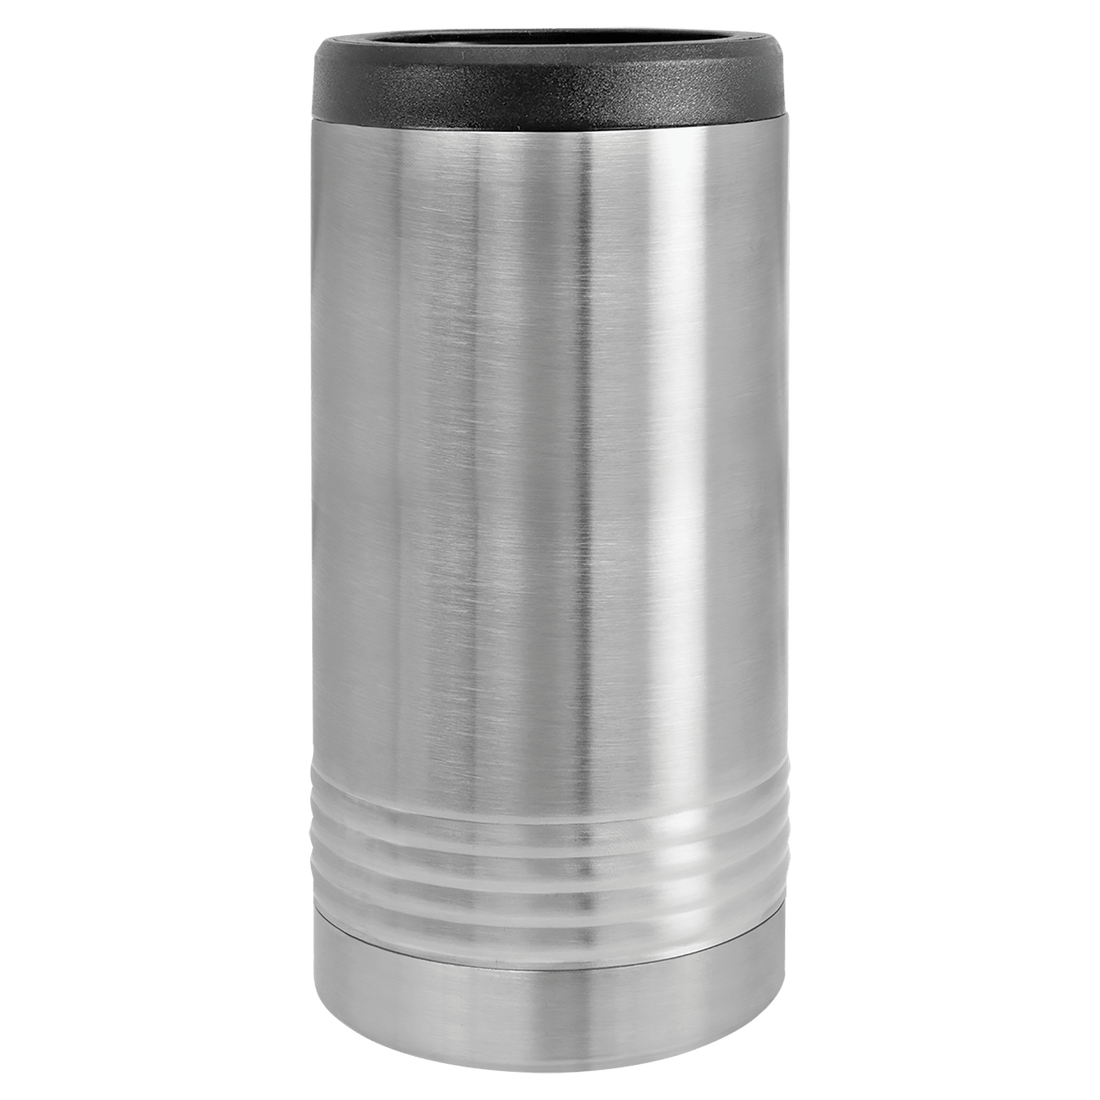 A slim stainless steel beverage holder with vacuum insulation.